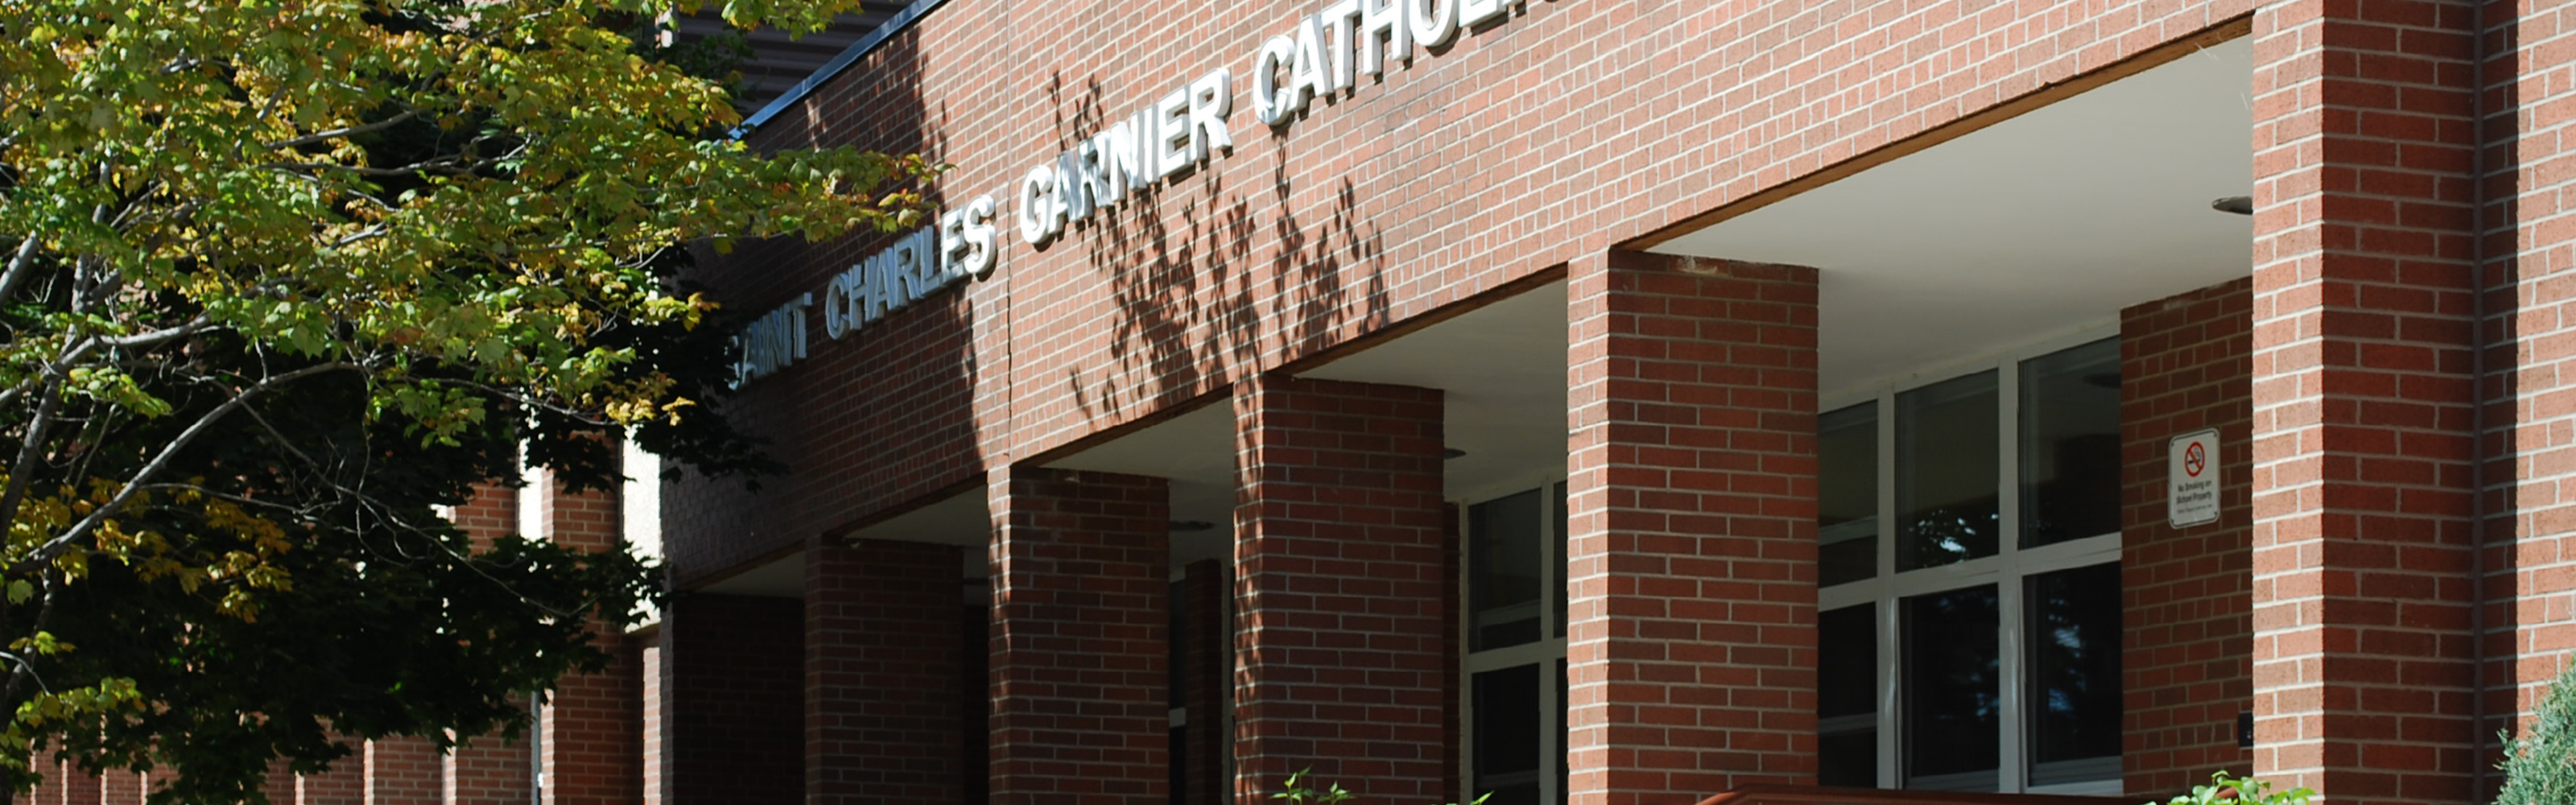 The front of the St. Charles Garnier Catholic School building.